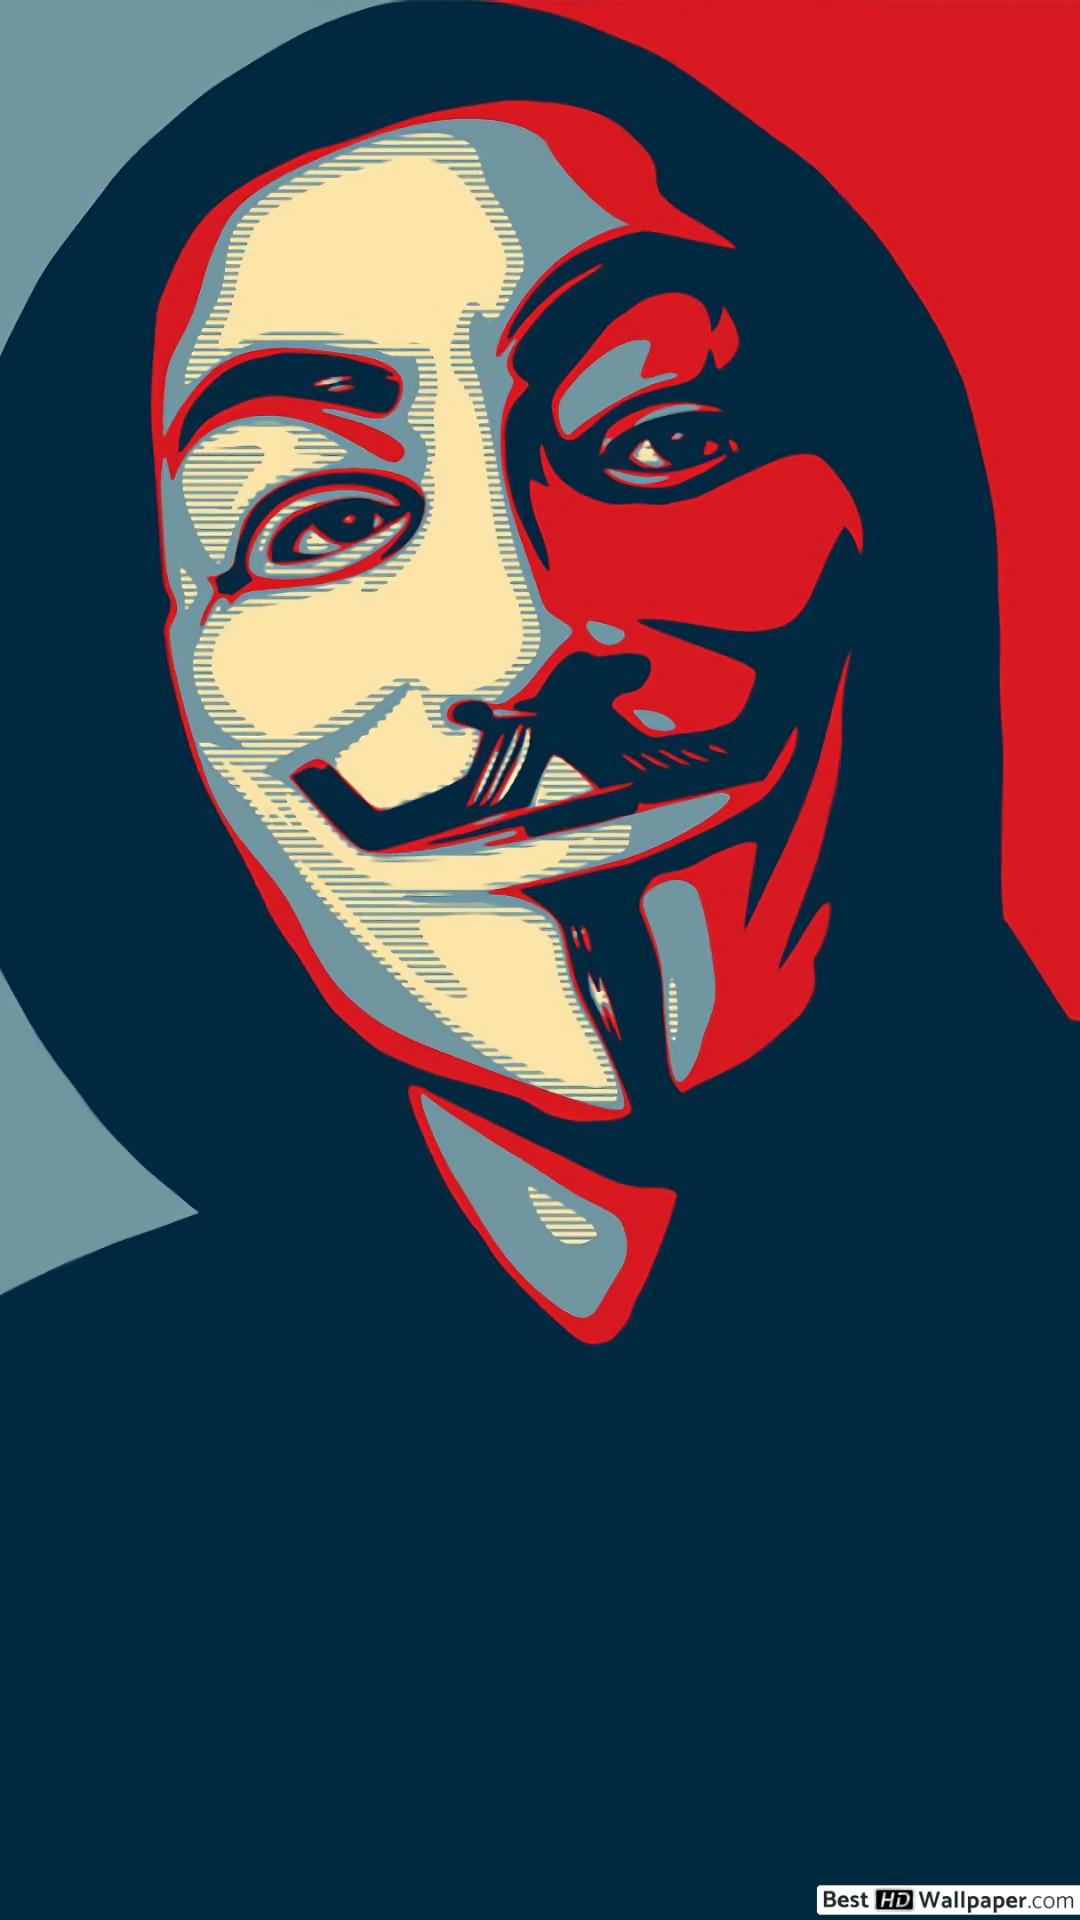 Anonymous Wallpaper For Mobile - HD Wallpaper 